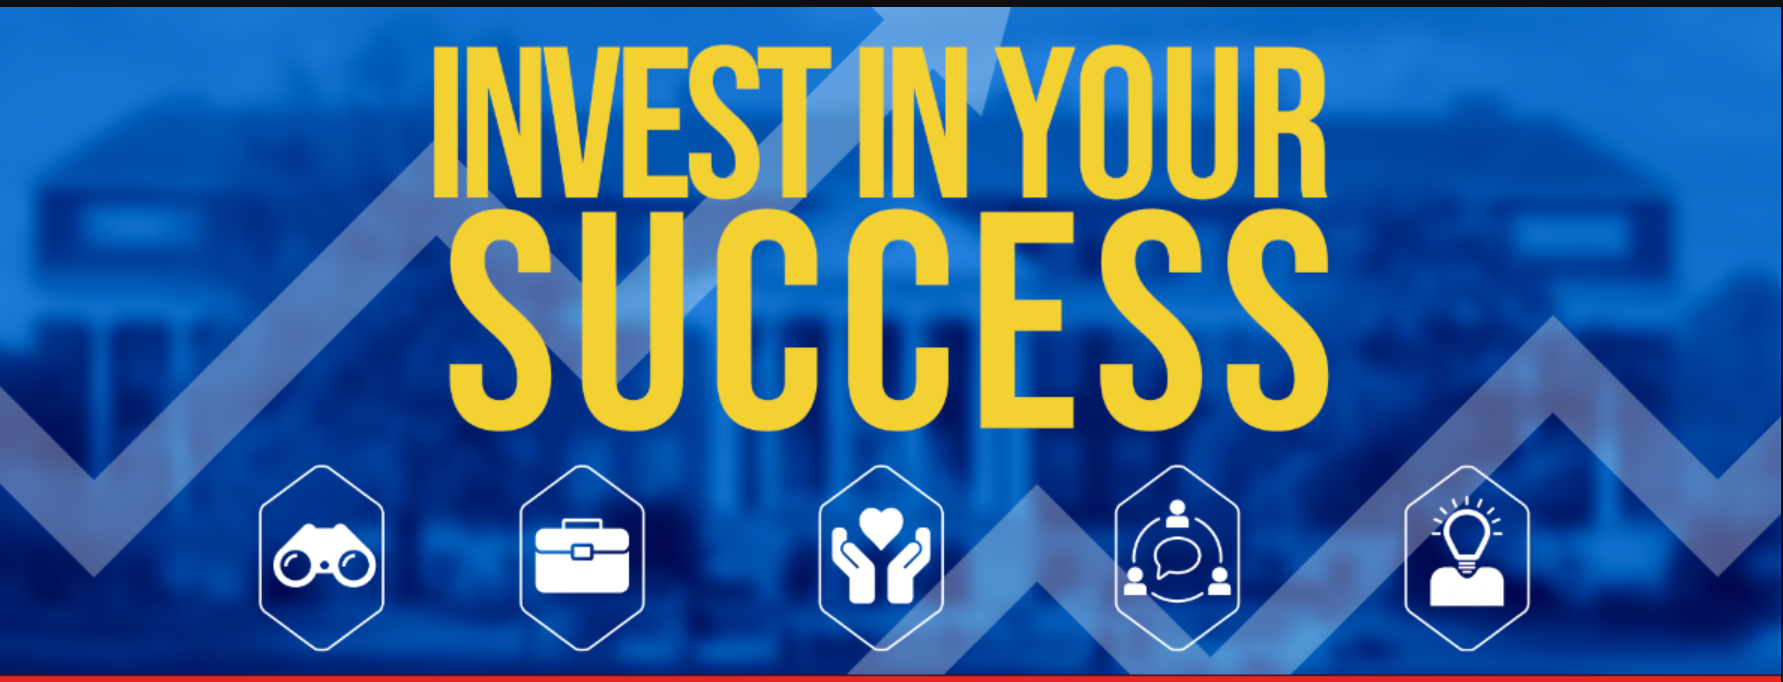 The phrase "invest in your success" in front of a blue background